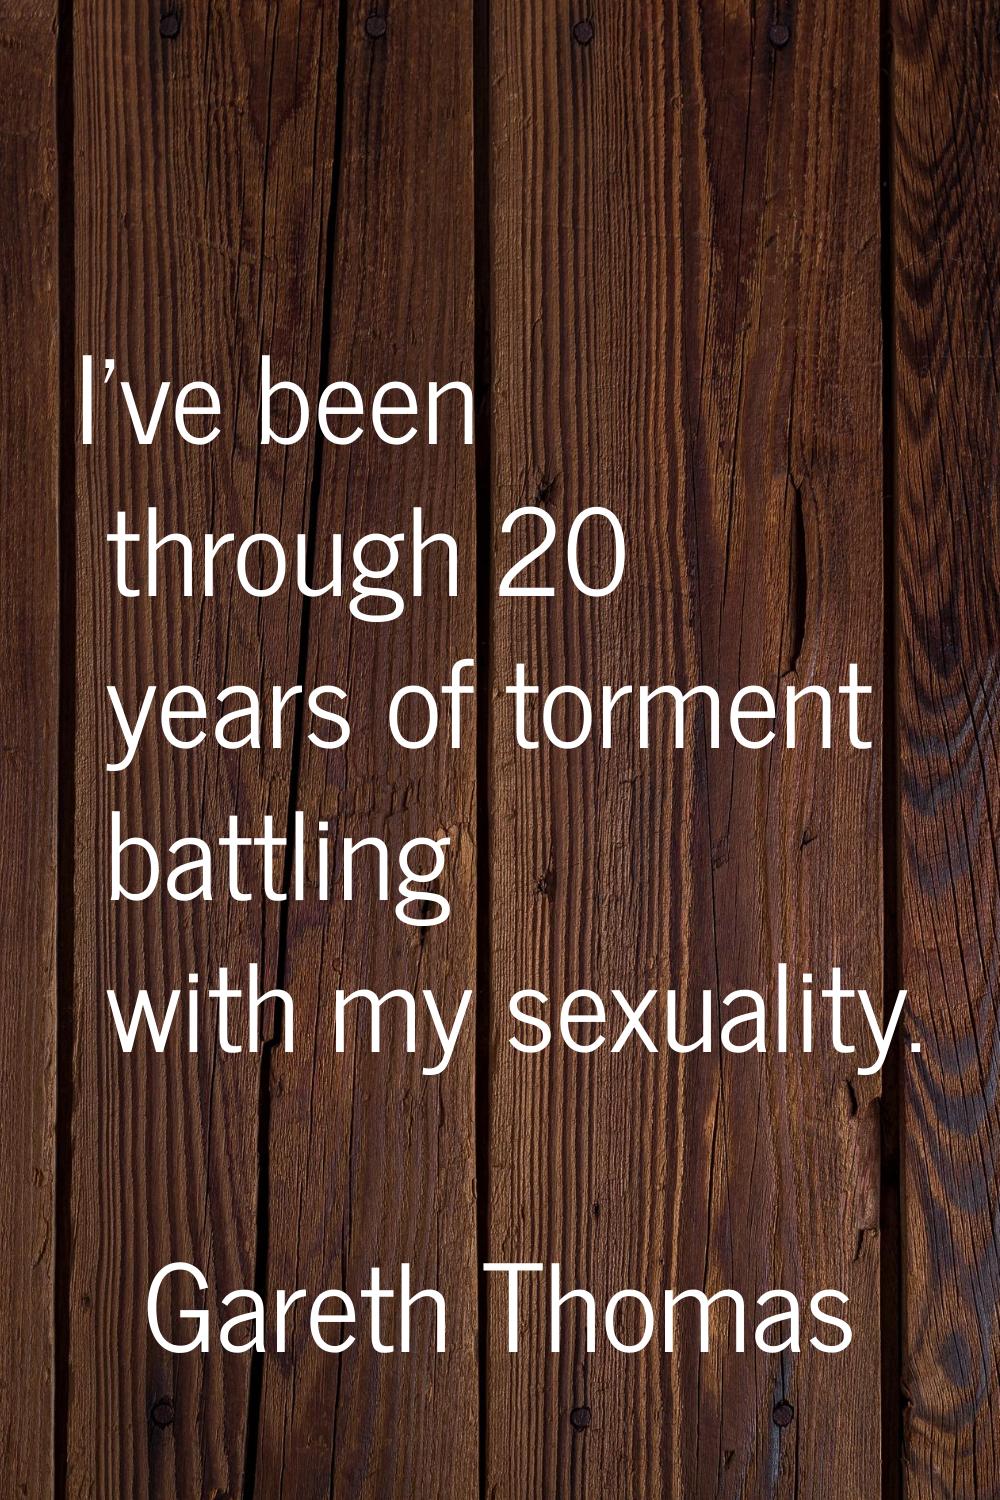 I've been through 20 years of torment battling with my sexuality.